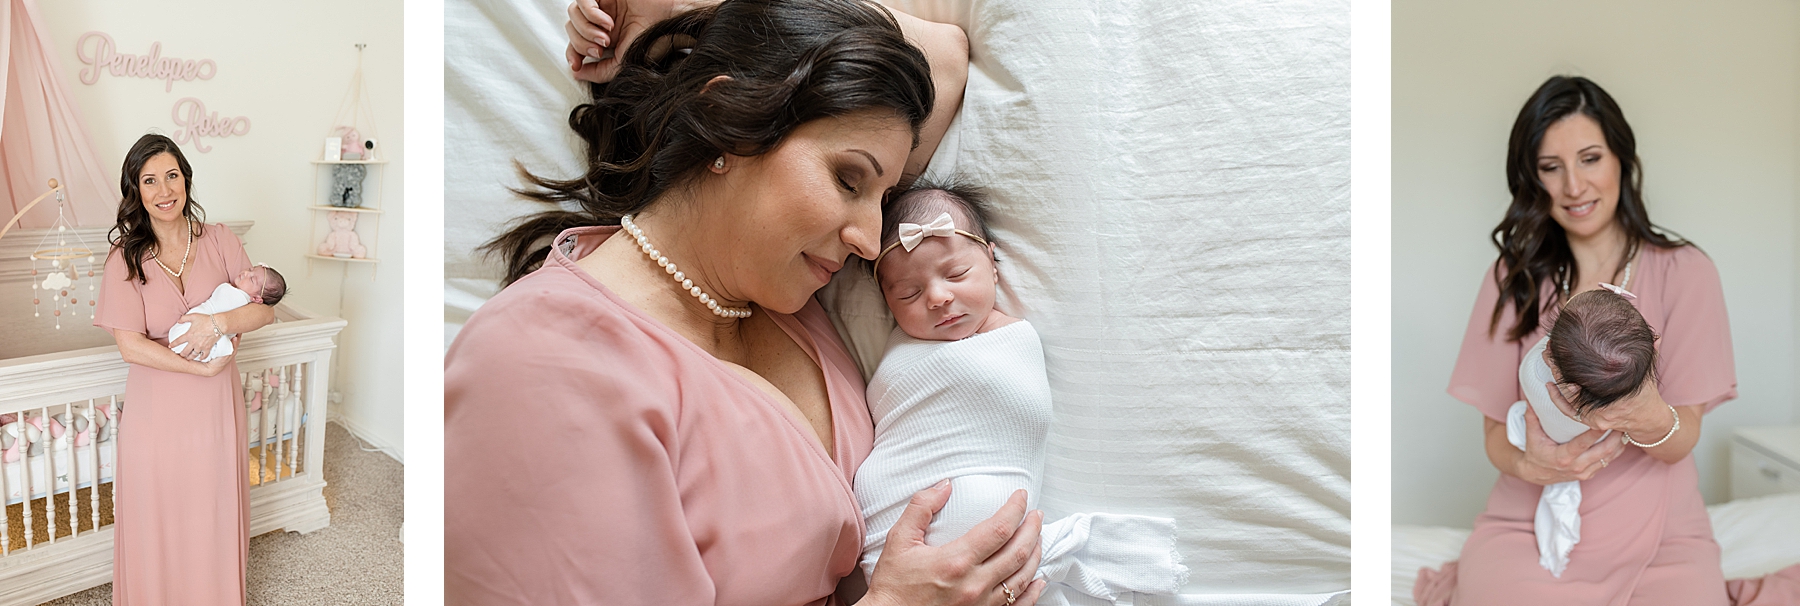 Mom in pink dress with newborn baby girl in white swaddle | Lindsey Dutton Photography | Dallas Area Family Photographer | newborn session, newborn posing ideas, newborn photos, girl nursery inspiration | via lindseyduttonphotography.com